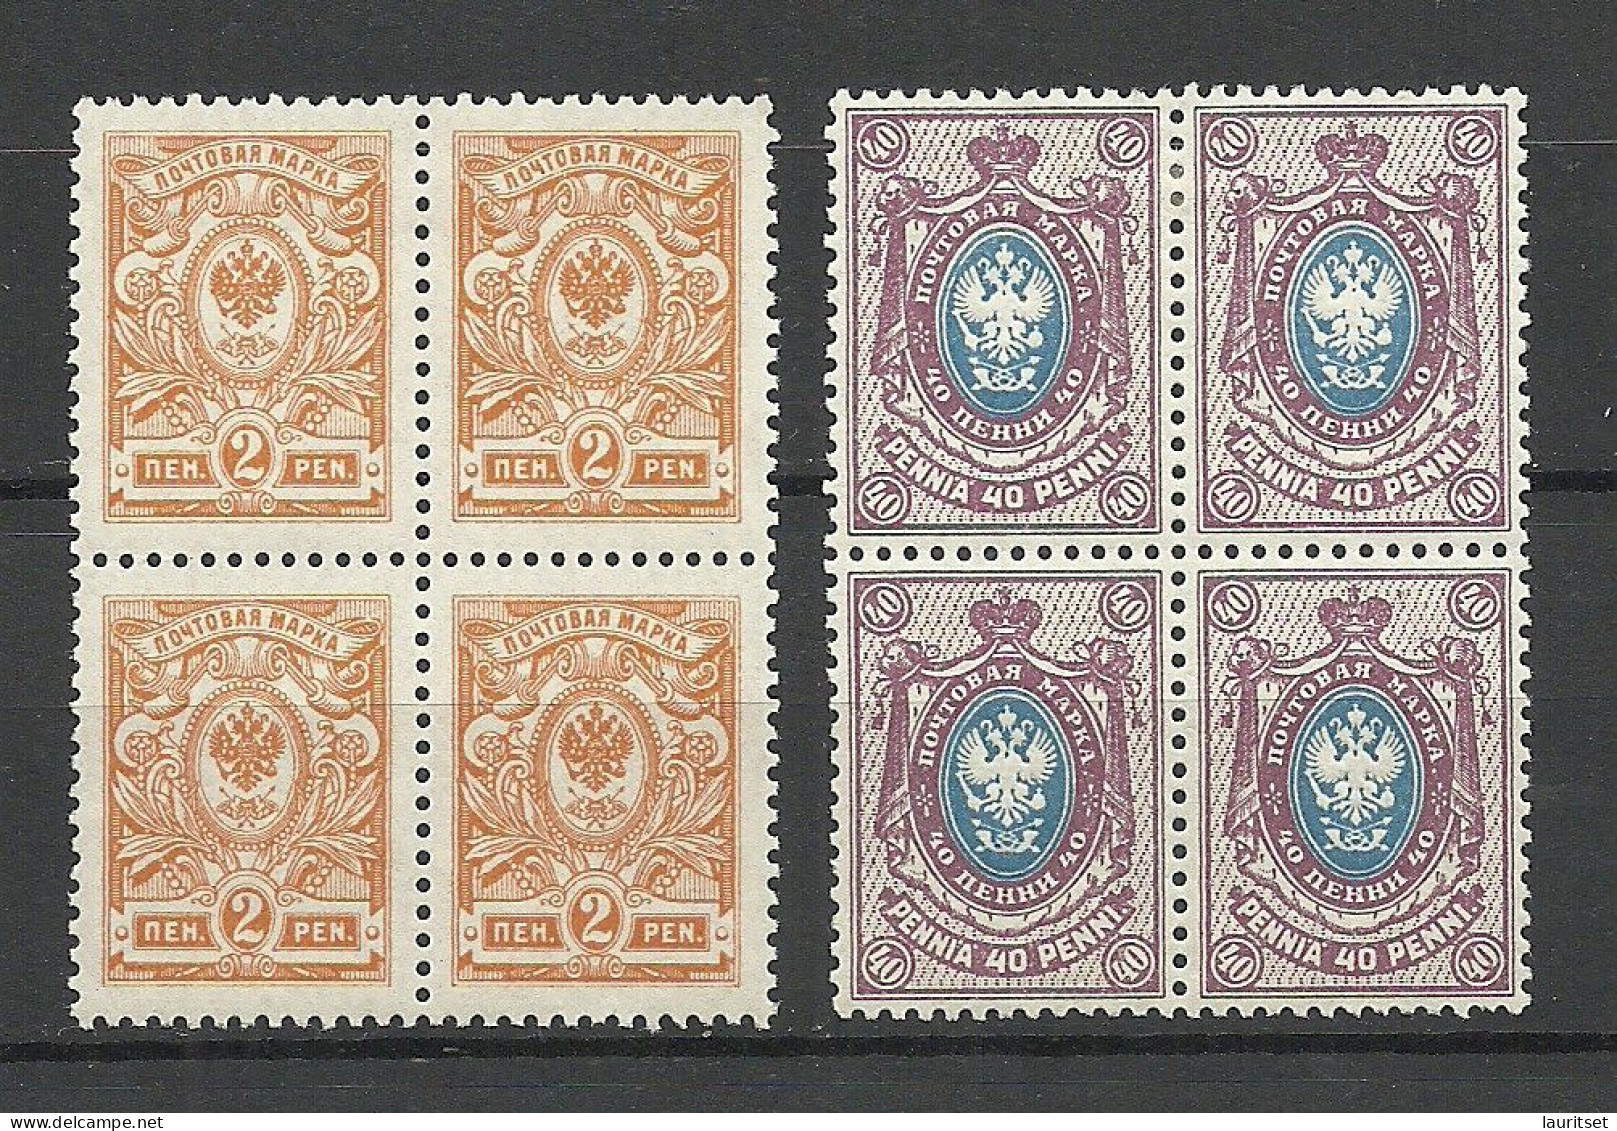 FINLAND FINNLAND 1911 Michel 61 & 65 As 4-blocks MNH/MH (2 Upper Stamps Are MNH/**, Lower Row Is MH/*) - Neufs